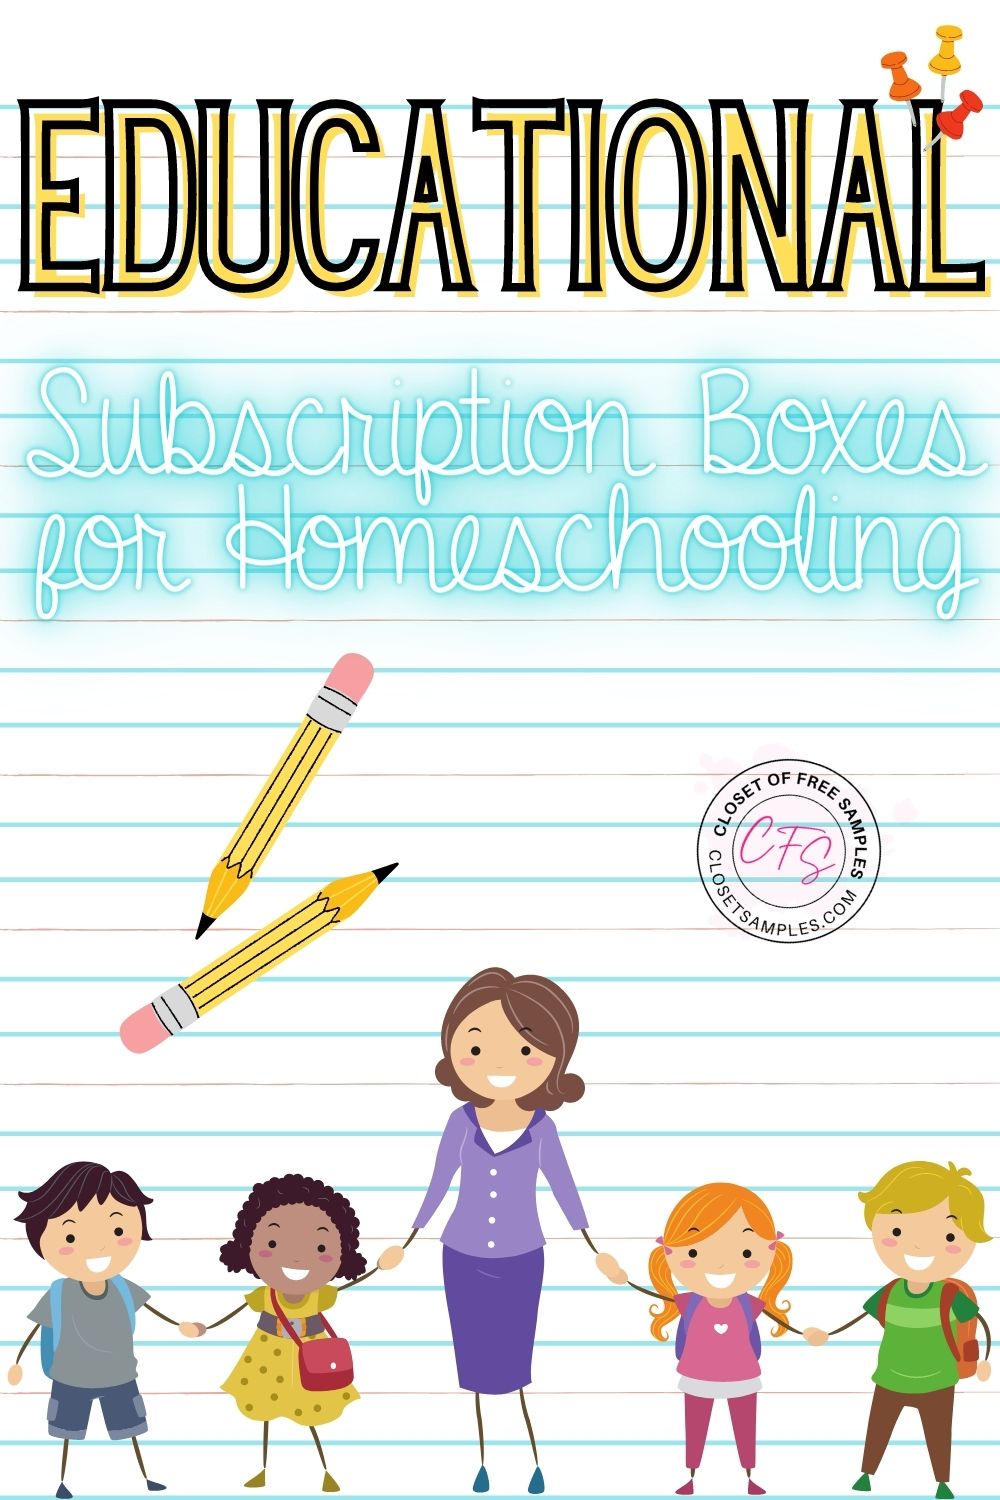 Educational Subscription Boxes from Cratejoy for Homeschooling closetsamples pinterest